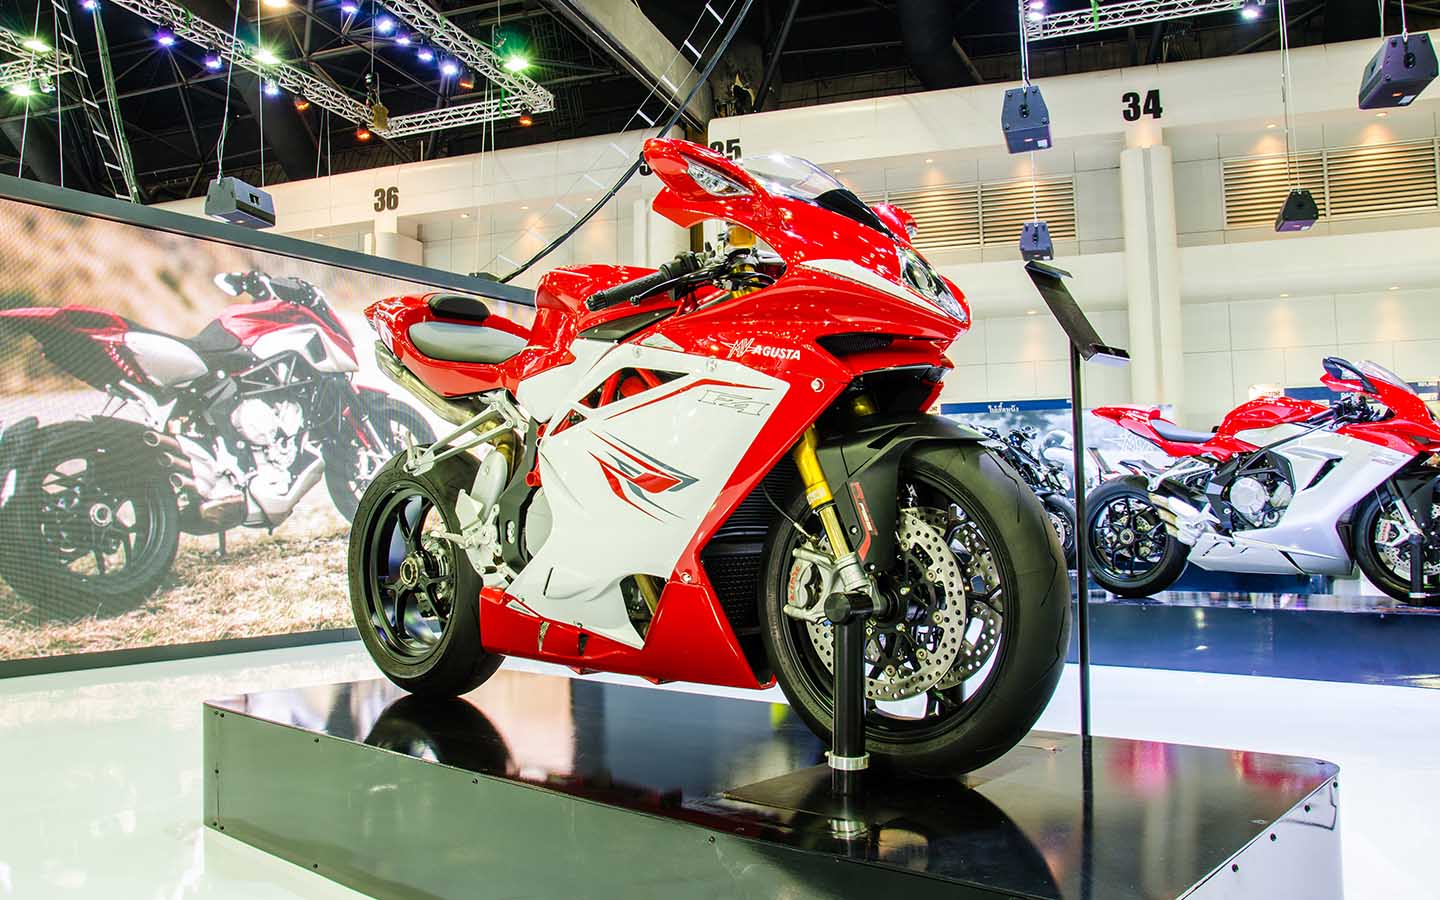 MV Agusta F4 1000R has featured in the Transformers movies